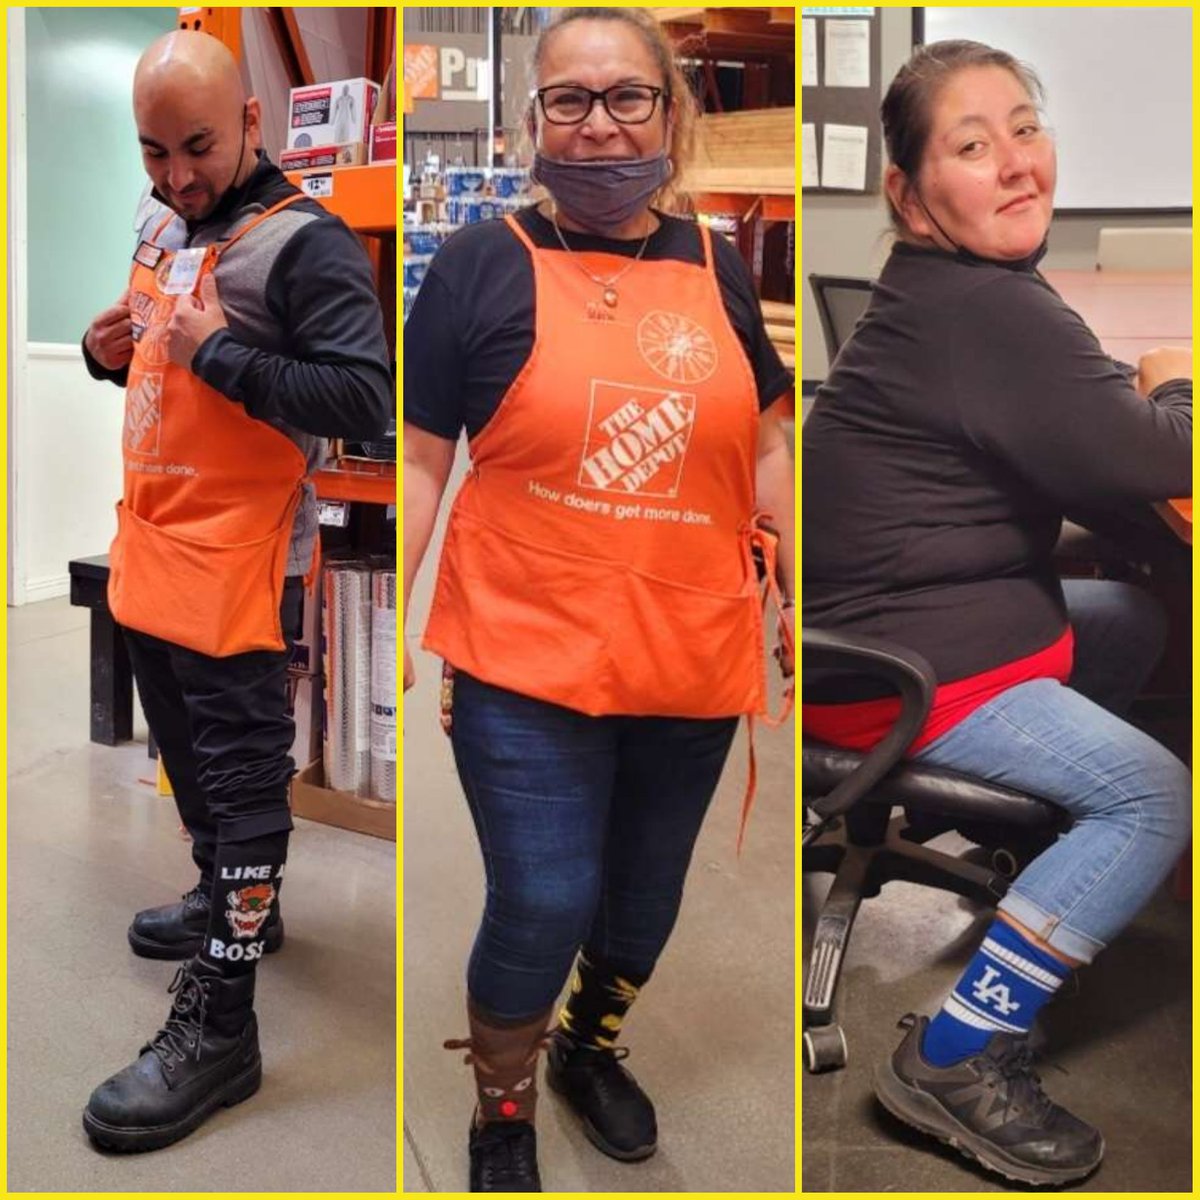 Fun, Fun and more Fun!
#CAM2022 Store 1040 Oxnard having fun across the store from Front End to Receiving to Back office to Managers! I love it 🧡 When you FES wears a cape on her socks, we fly together 🦸‍♀️